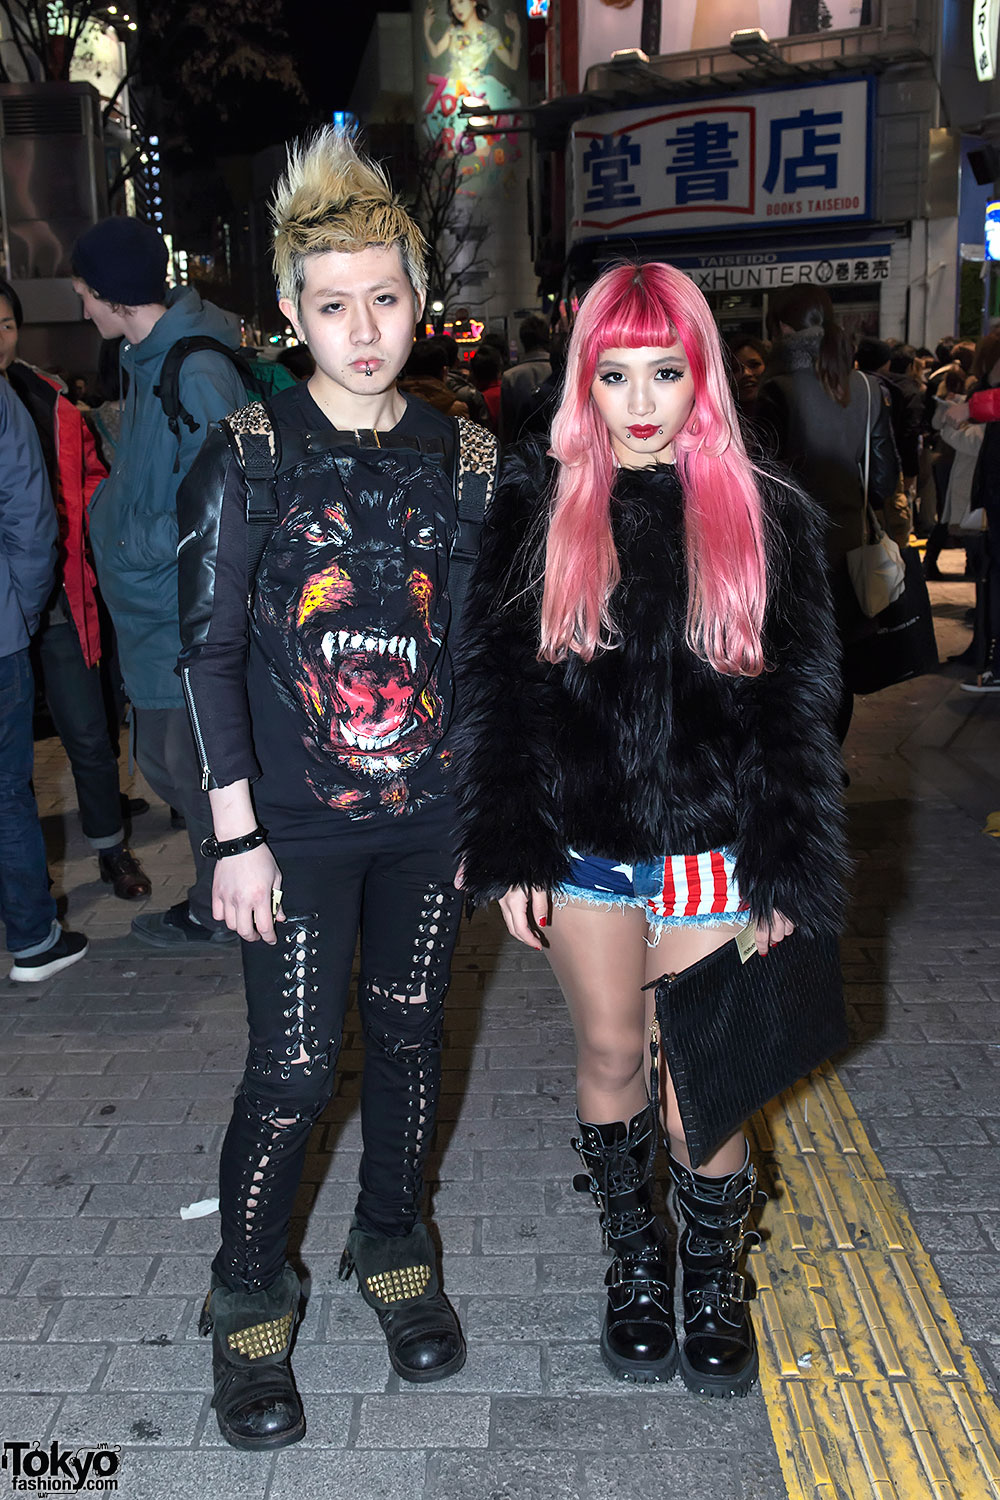 Givenchy Rottweiler, Pink Hair & Piercings in Shibuya on New Year's Eve